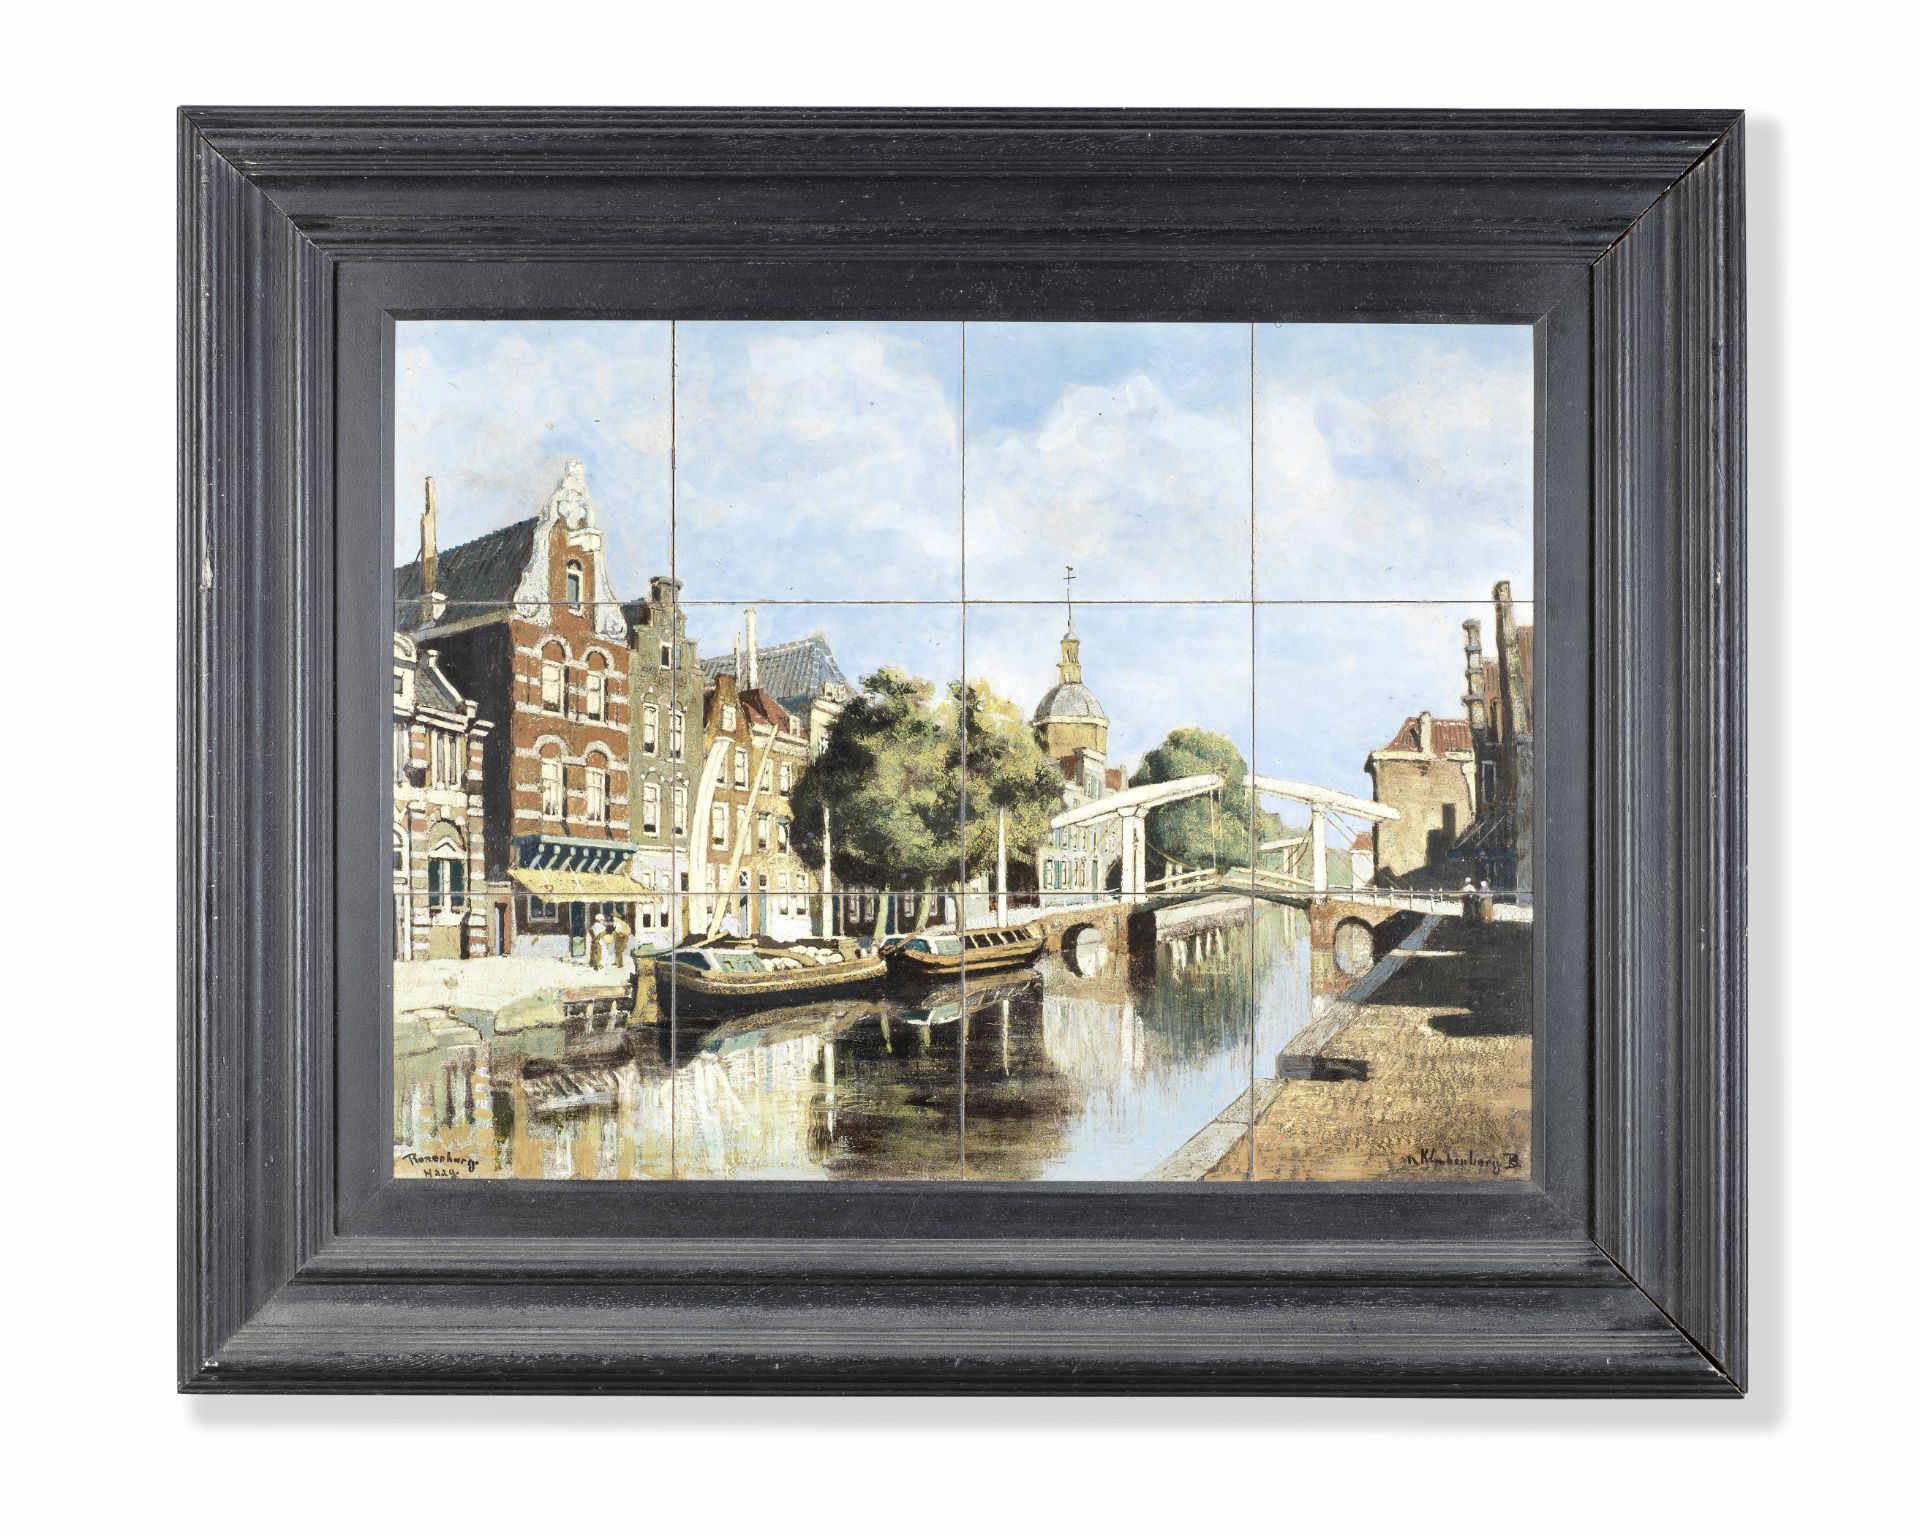 Rozenburg Tile picture of a canal view, 1896-98